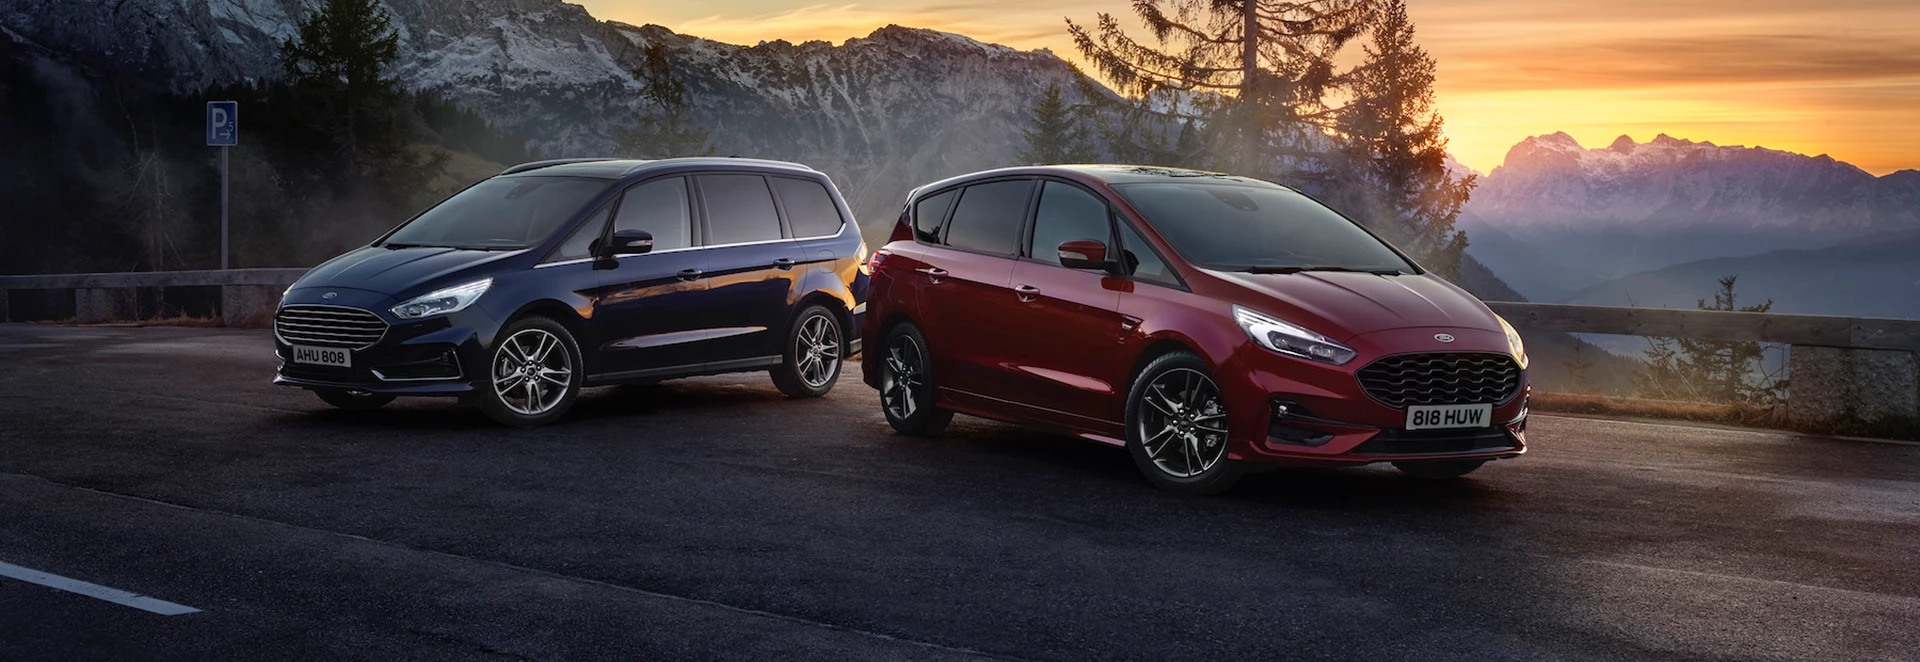 Ford introduces hybrid power to S-Max and Galaxy MPVs 